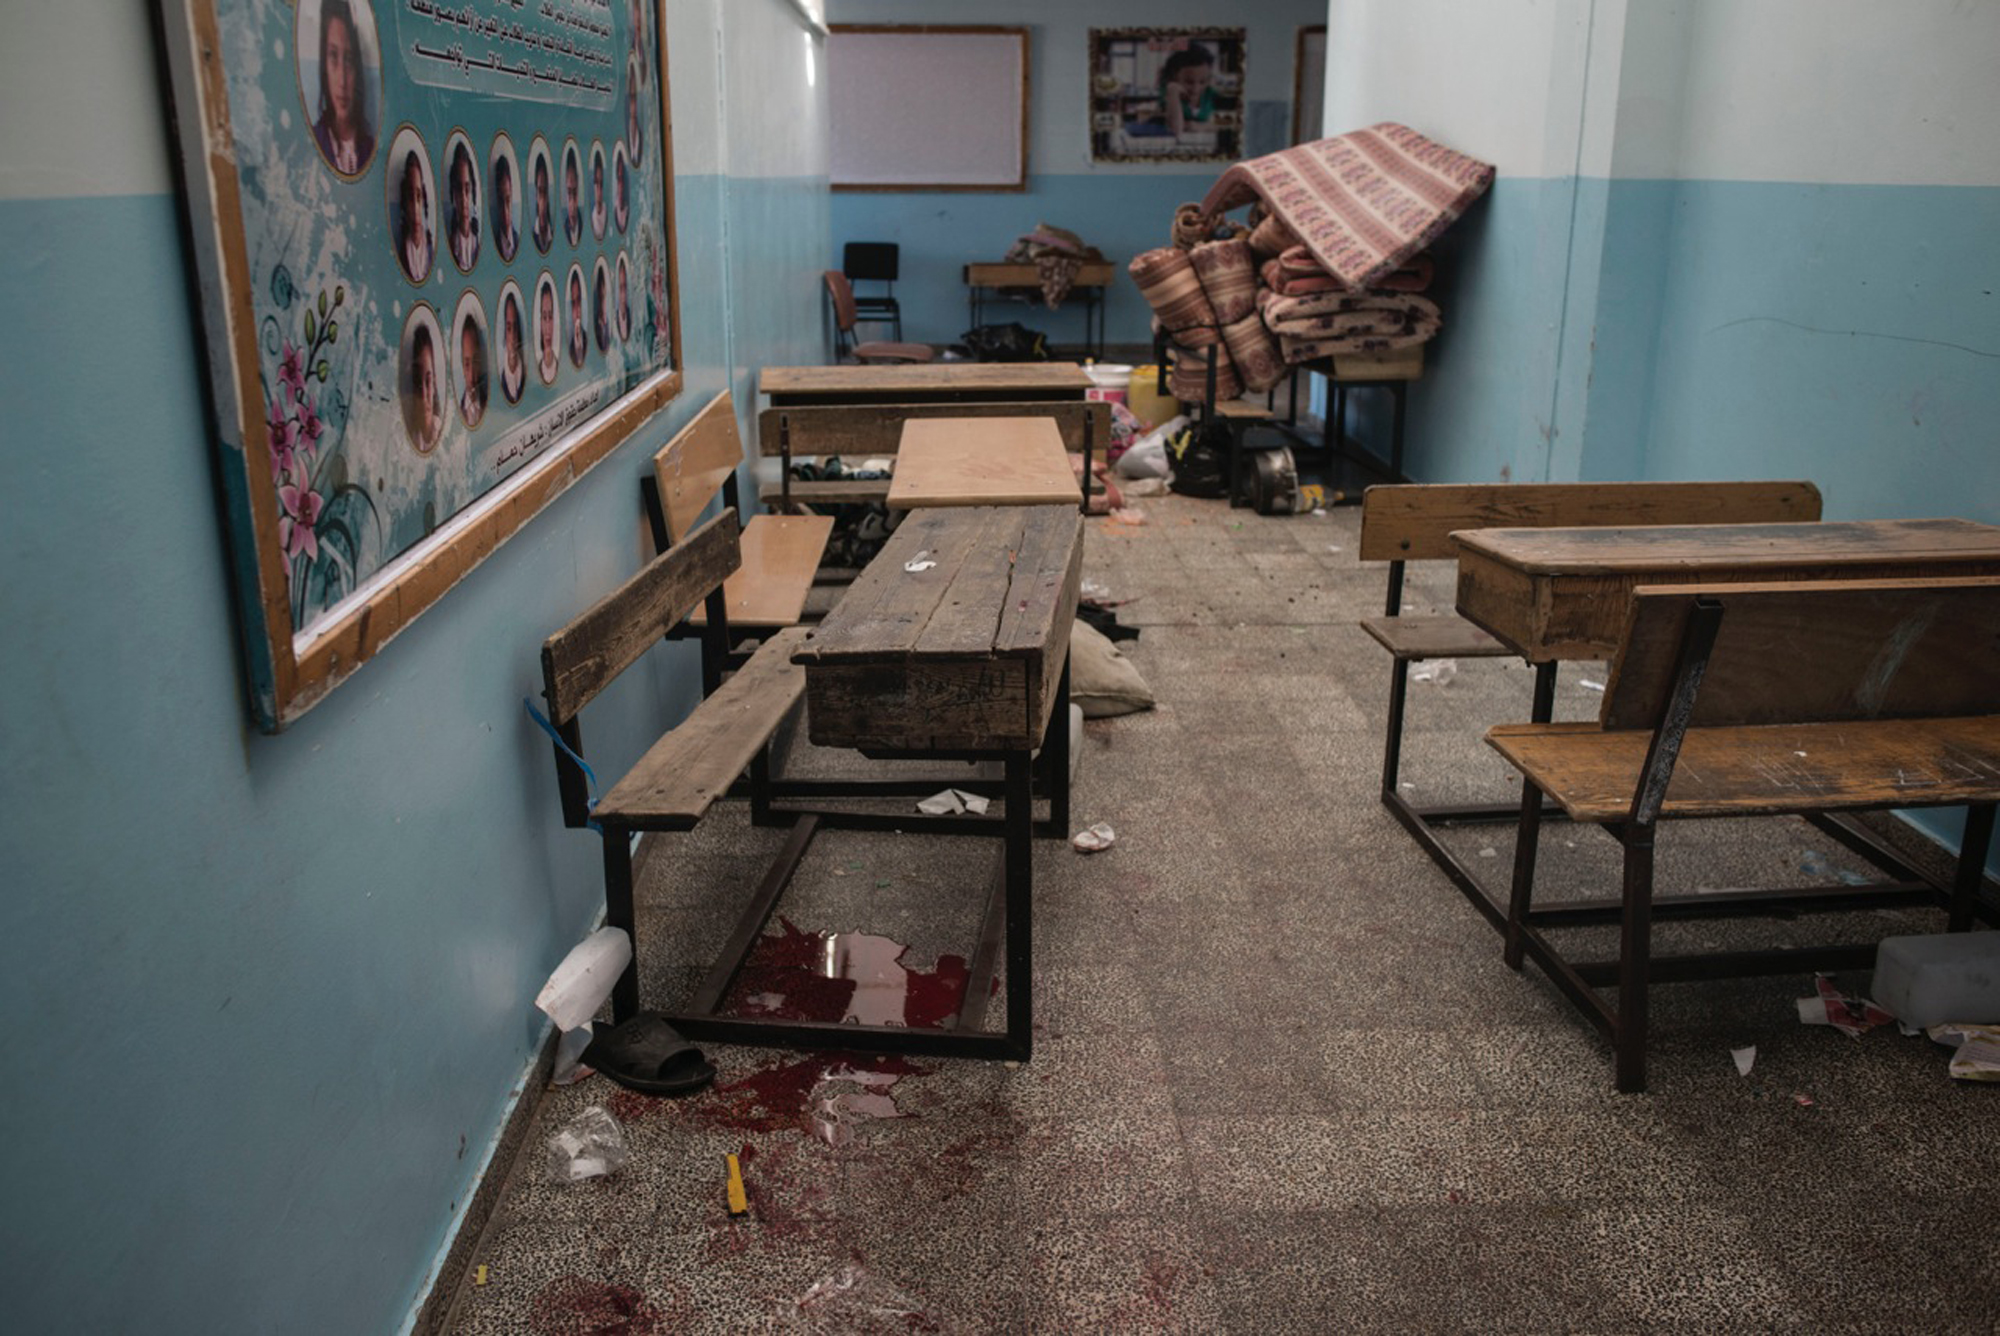 Blood stains of displaced Palestinians are seen inside the UNRWA school in Beit Hanoun after it has been hit, Gaza Strip, July 24, 2014.